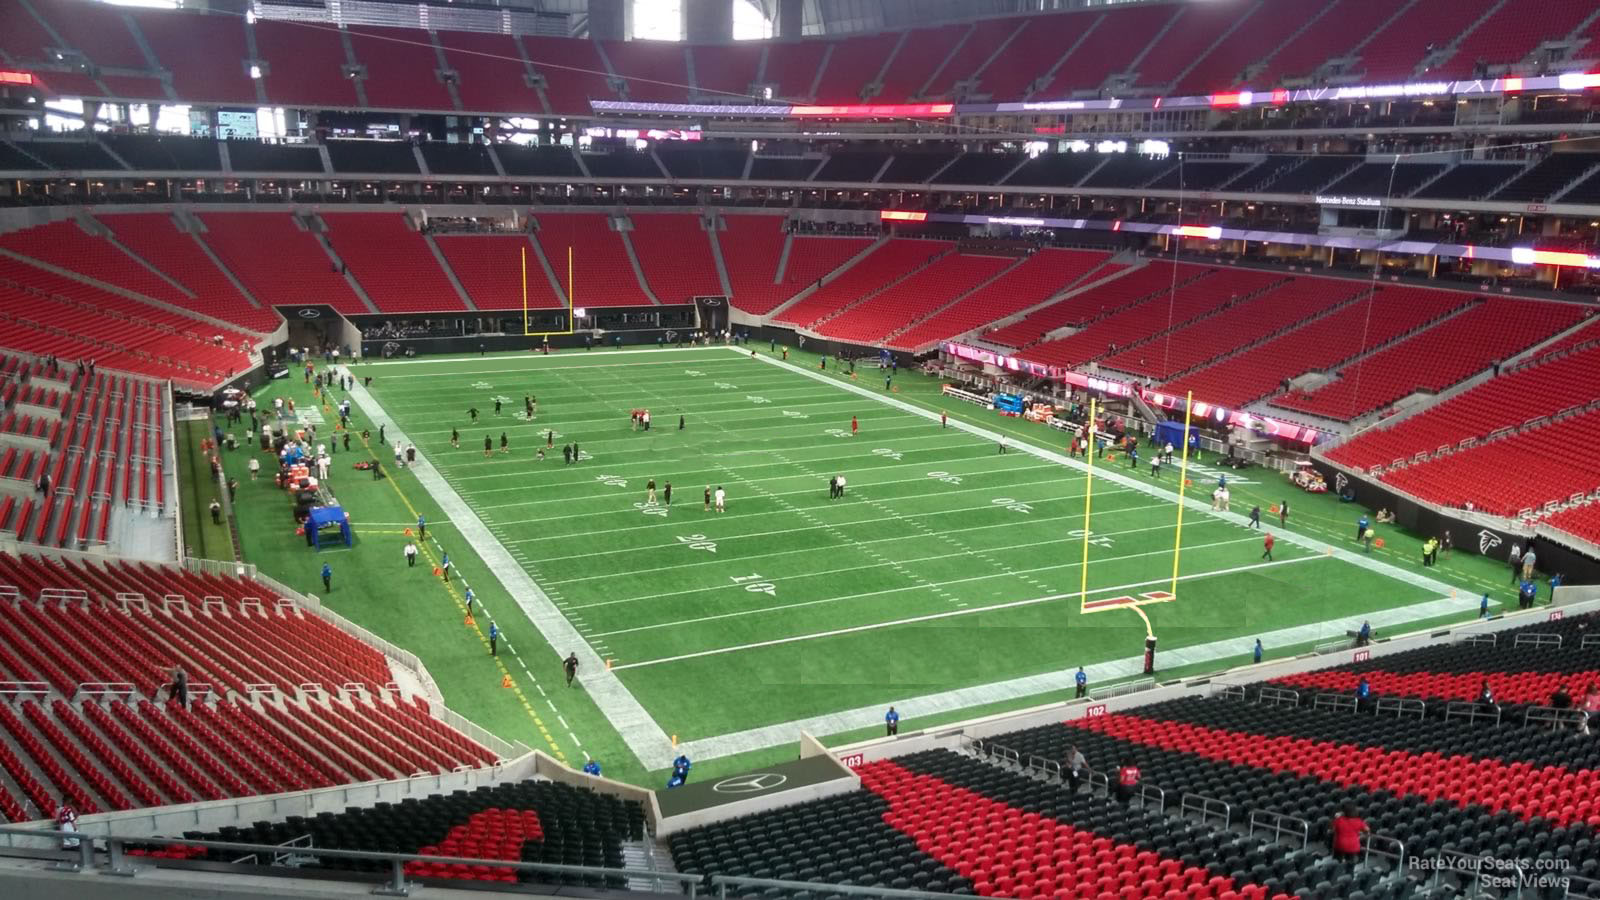 section 201, row 6 seat view  for football - mercedes-benz stadium